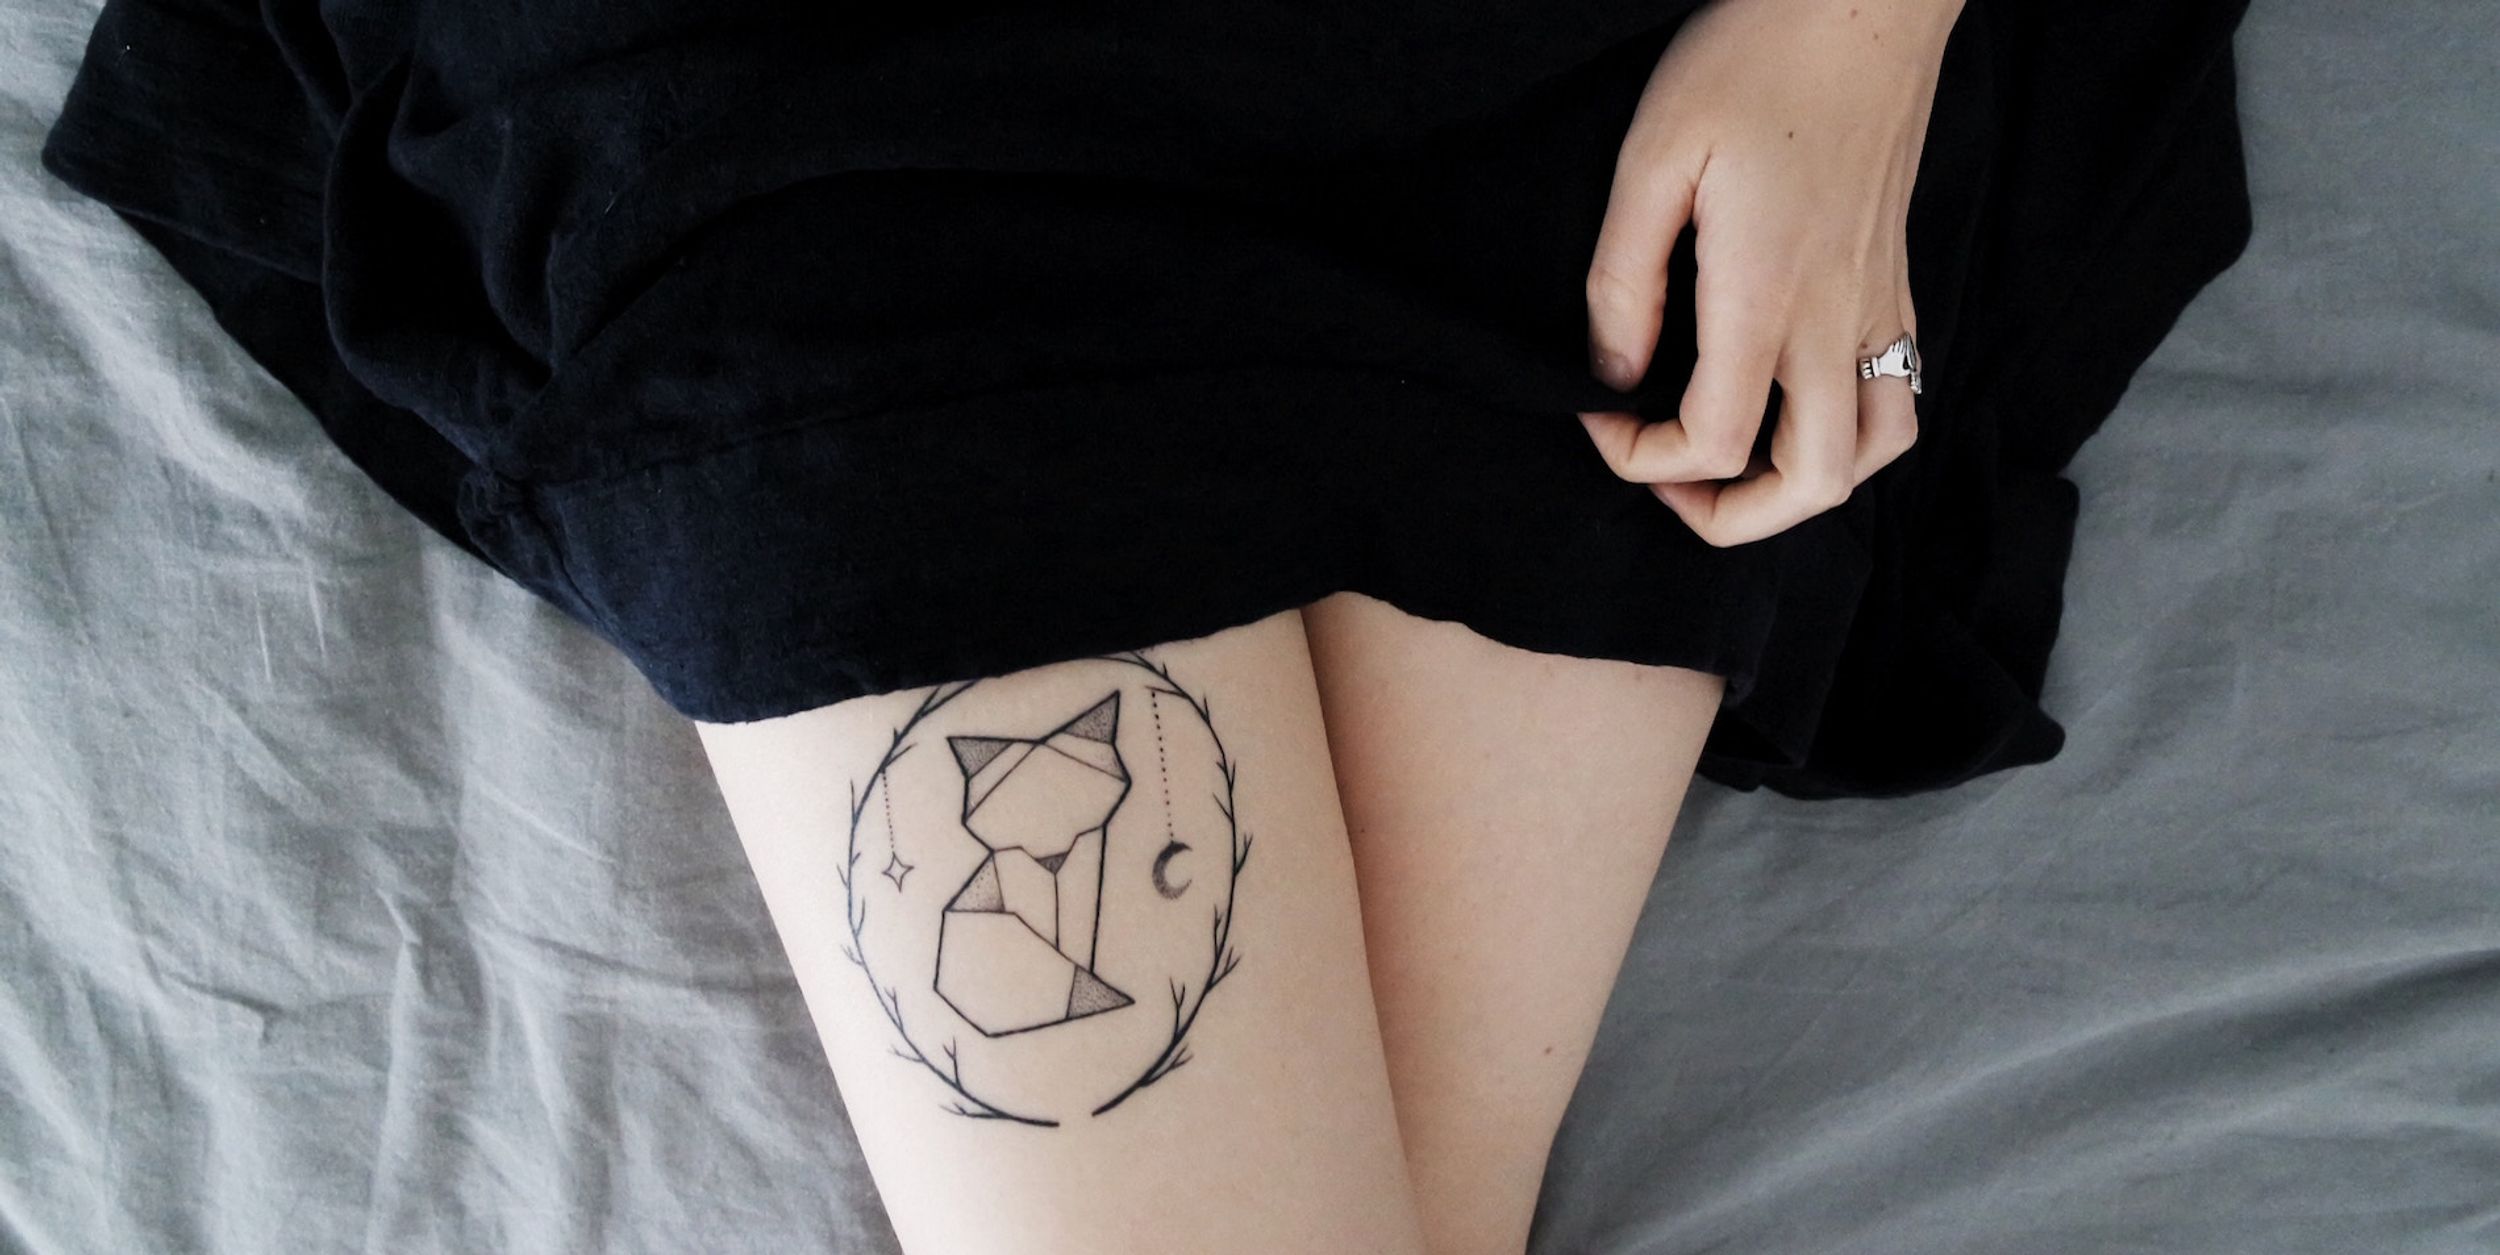 Not That I *Needed* A Reason, But My Tattoos Helped Me Cope With My Mental Illness